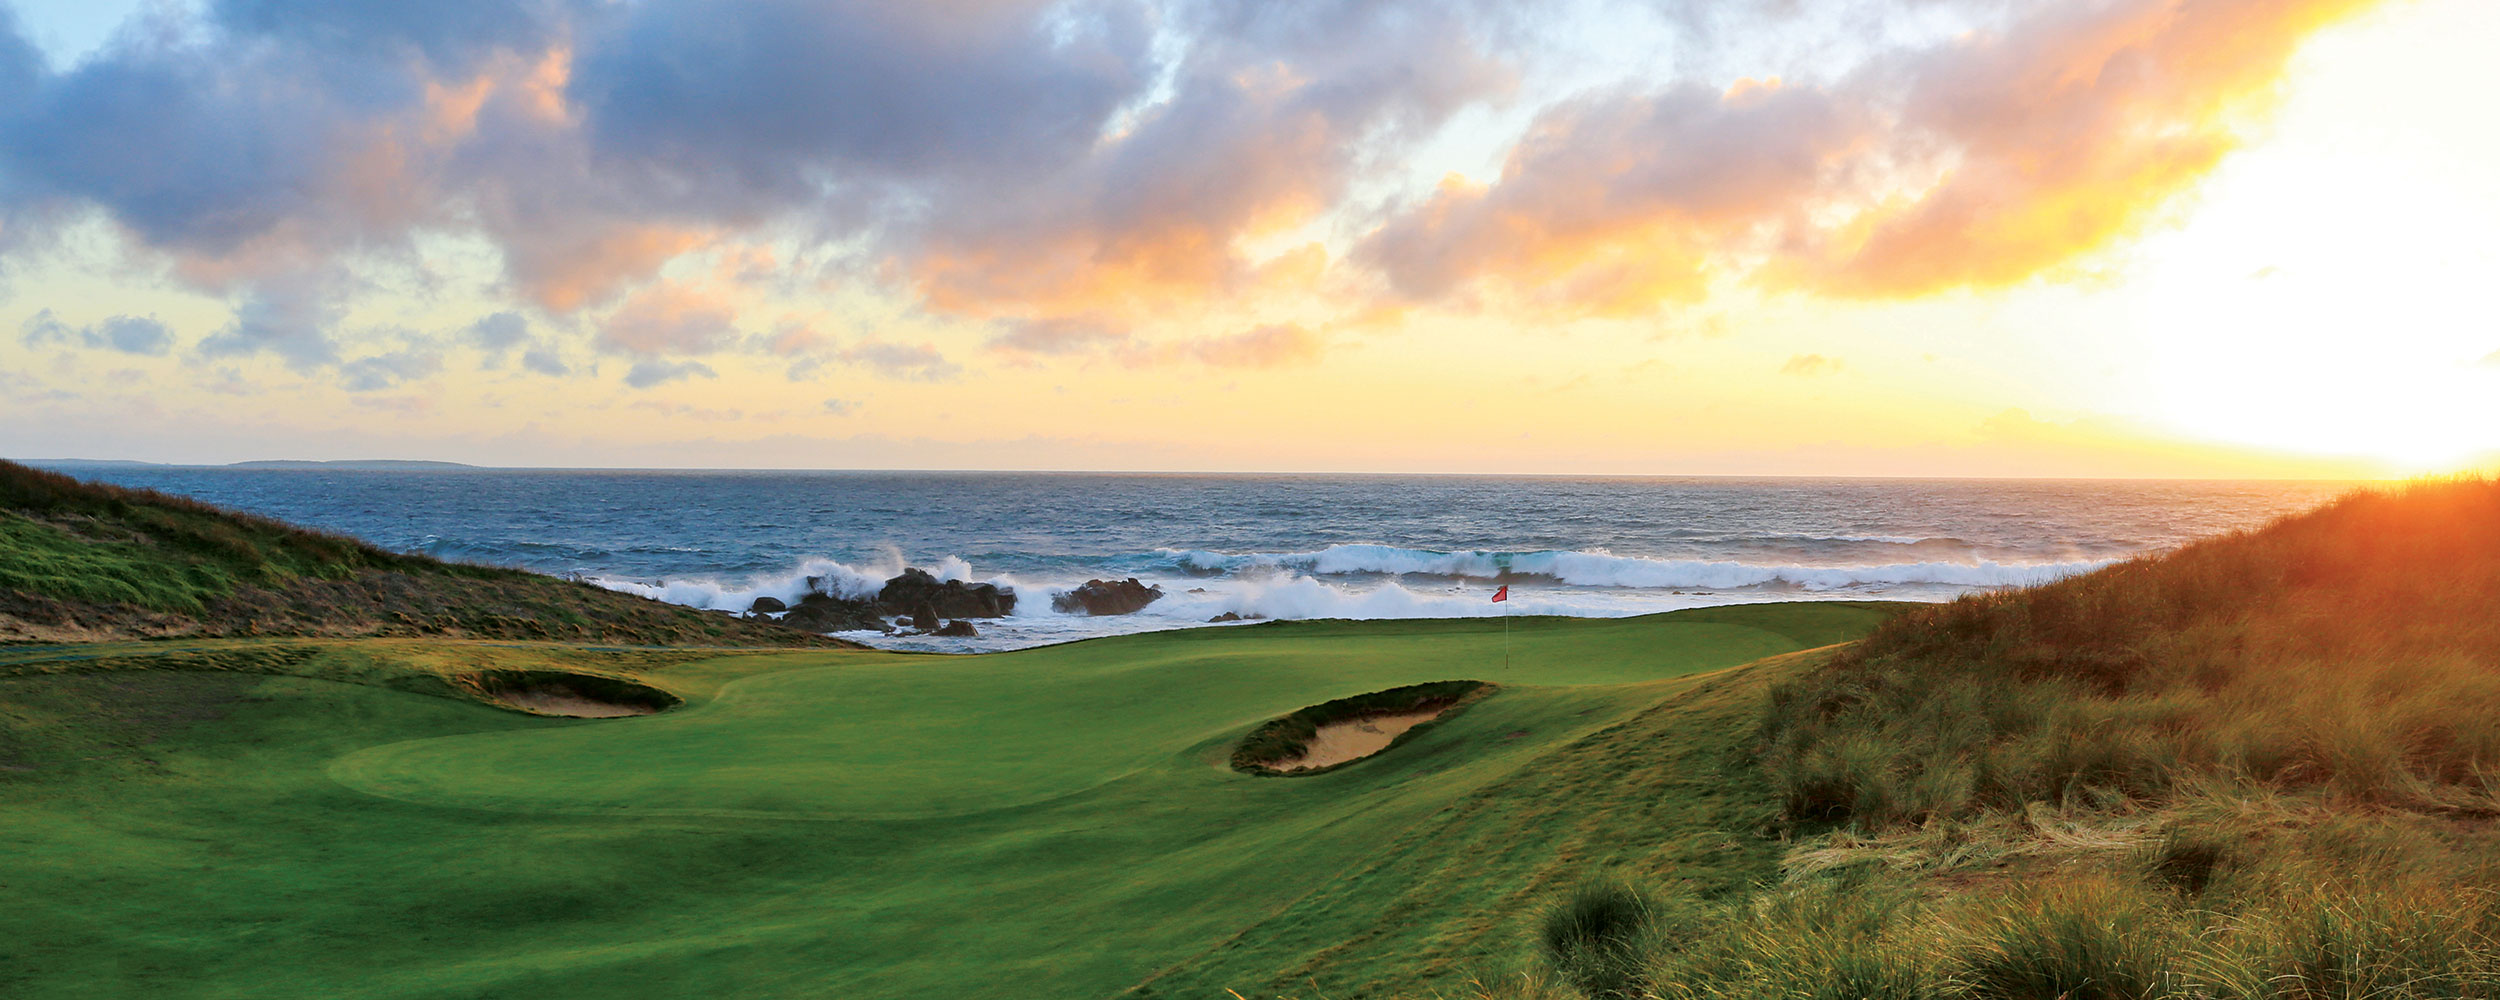 The 10th green provides a spectacular ocean backdrop while displaying dramatic contours of its own.